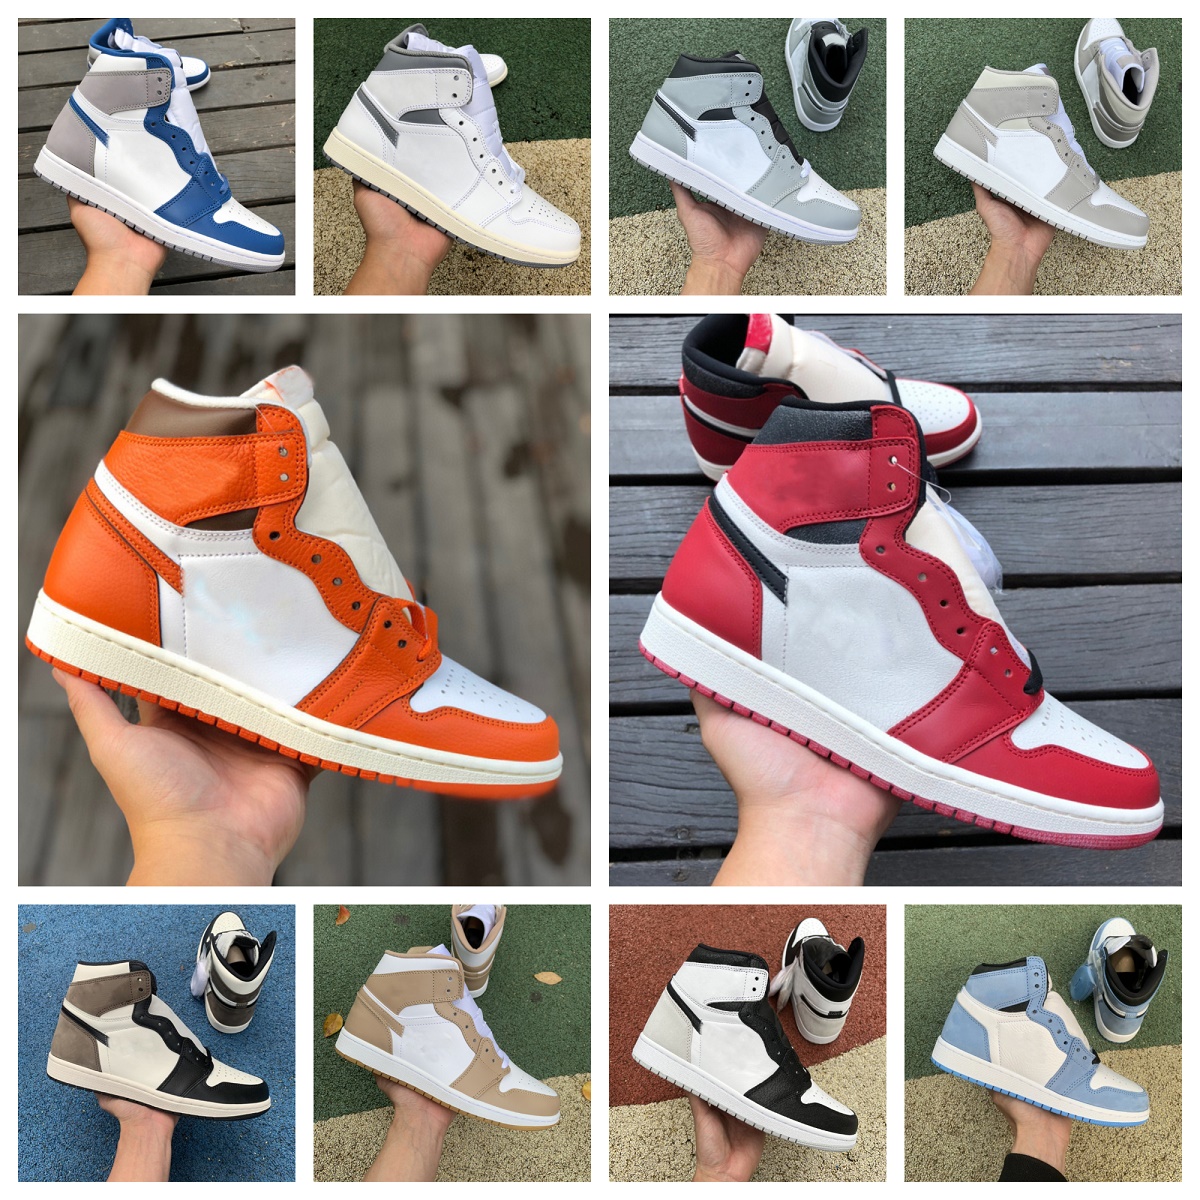 

Jumpman 1s High OG Basketball Shoes Retro 1 Mens Women University Blue Starfish Patent Bred Bleached Coral Tan Gum DARK MOCHA Twist Chicago Lost and Found Sneakers, Bubble package bag